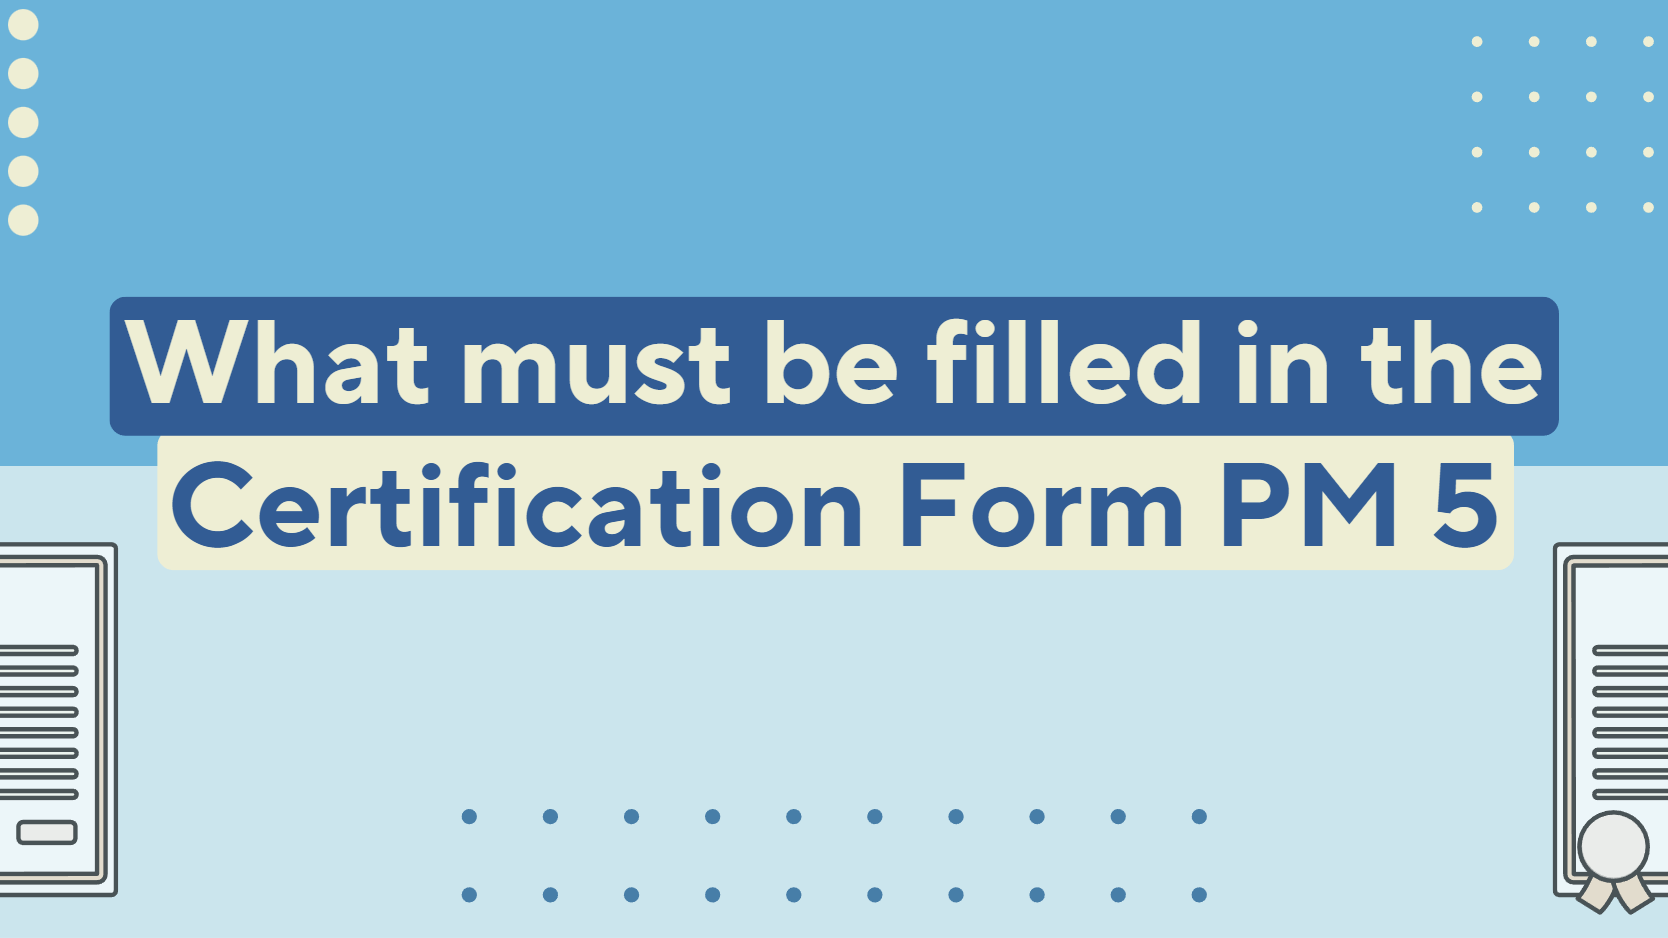 Certification Form PM 5